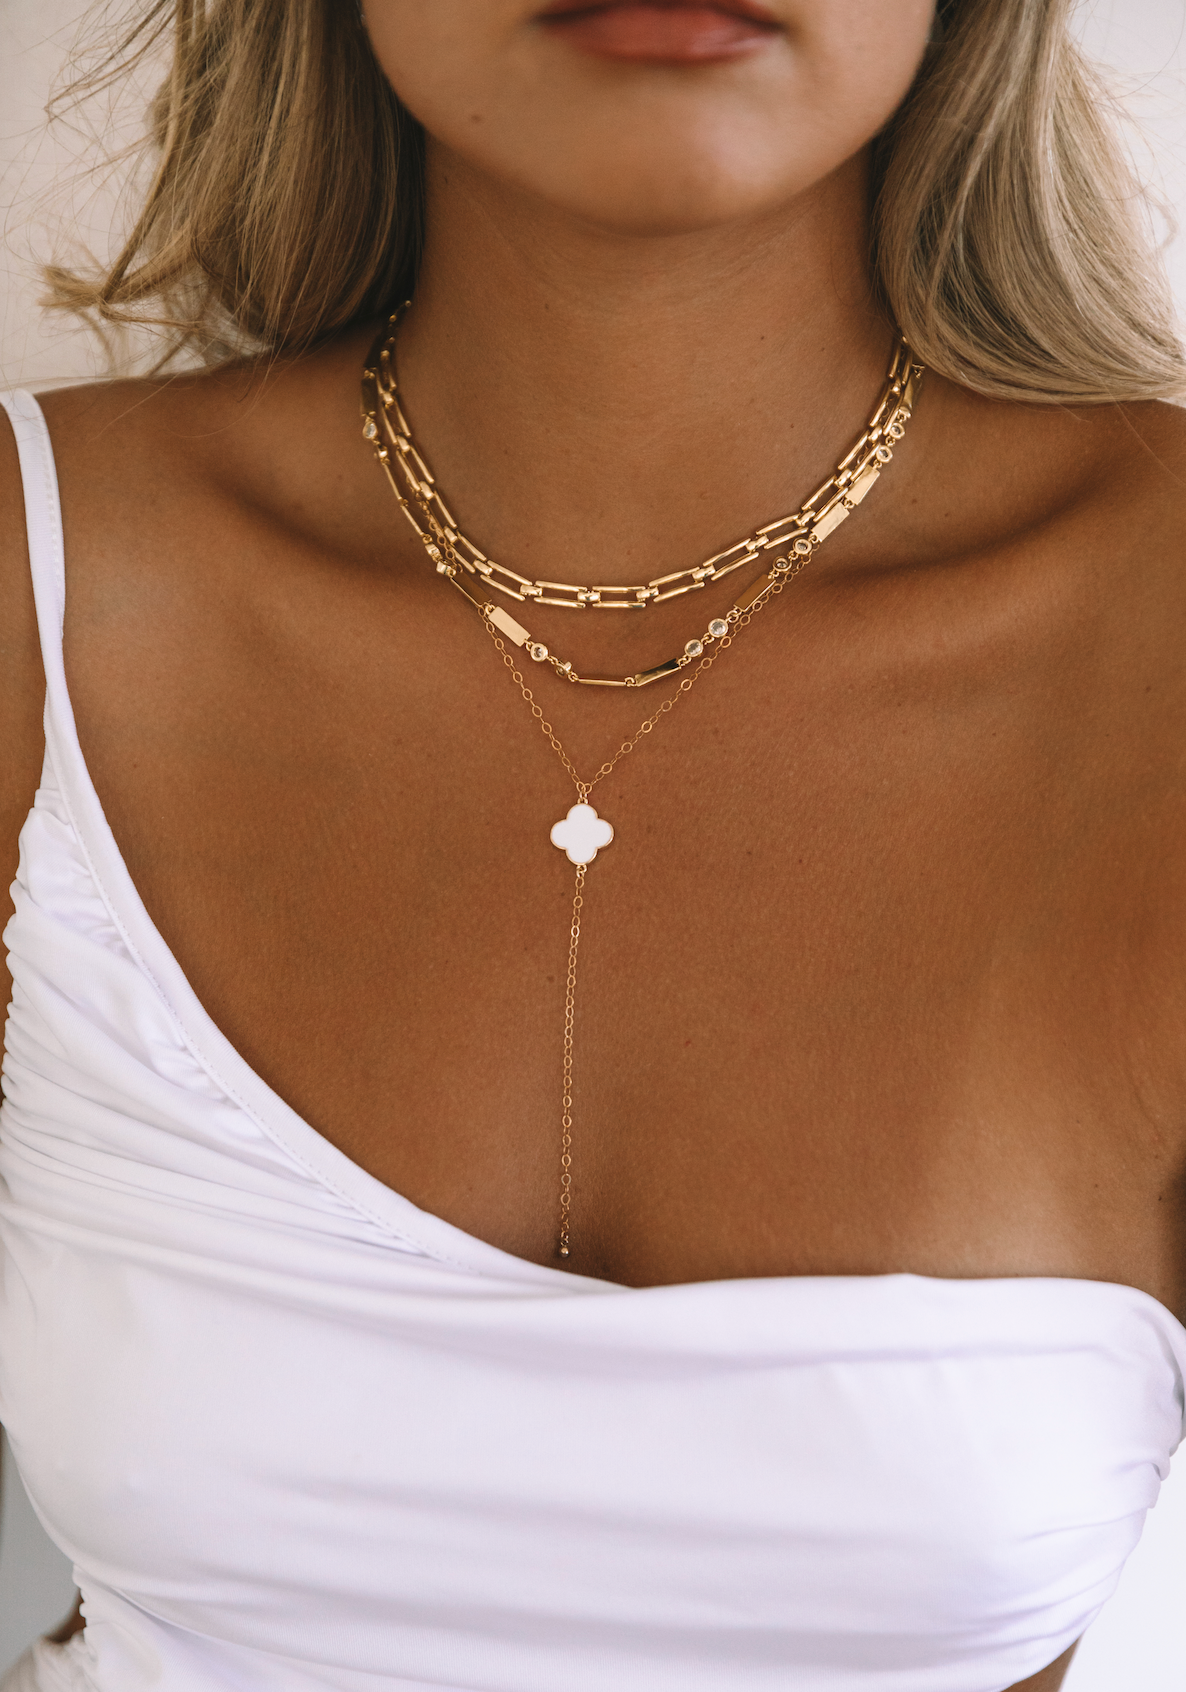 The Rectangle Clip Necklace